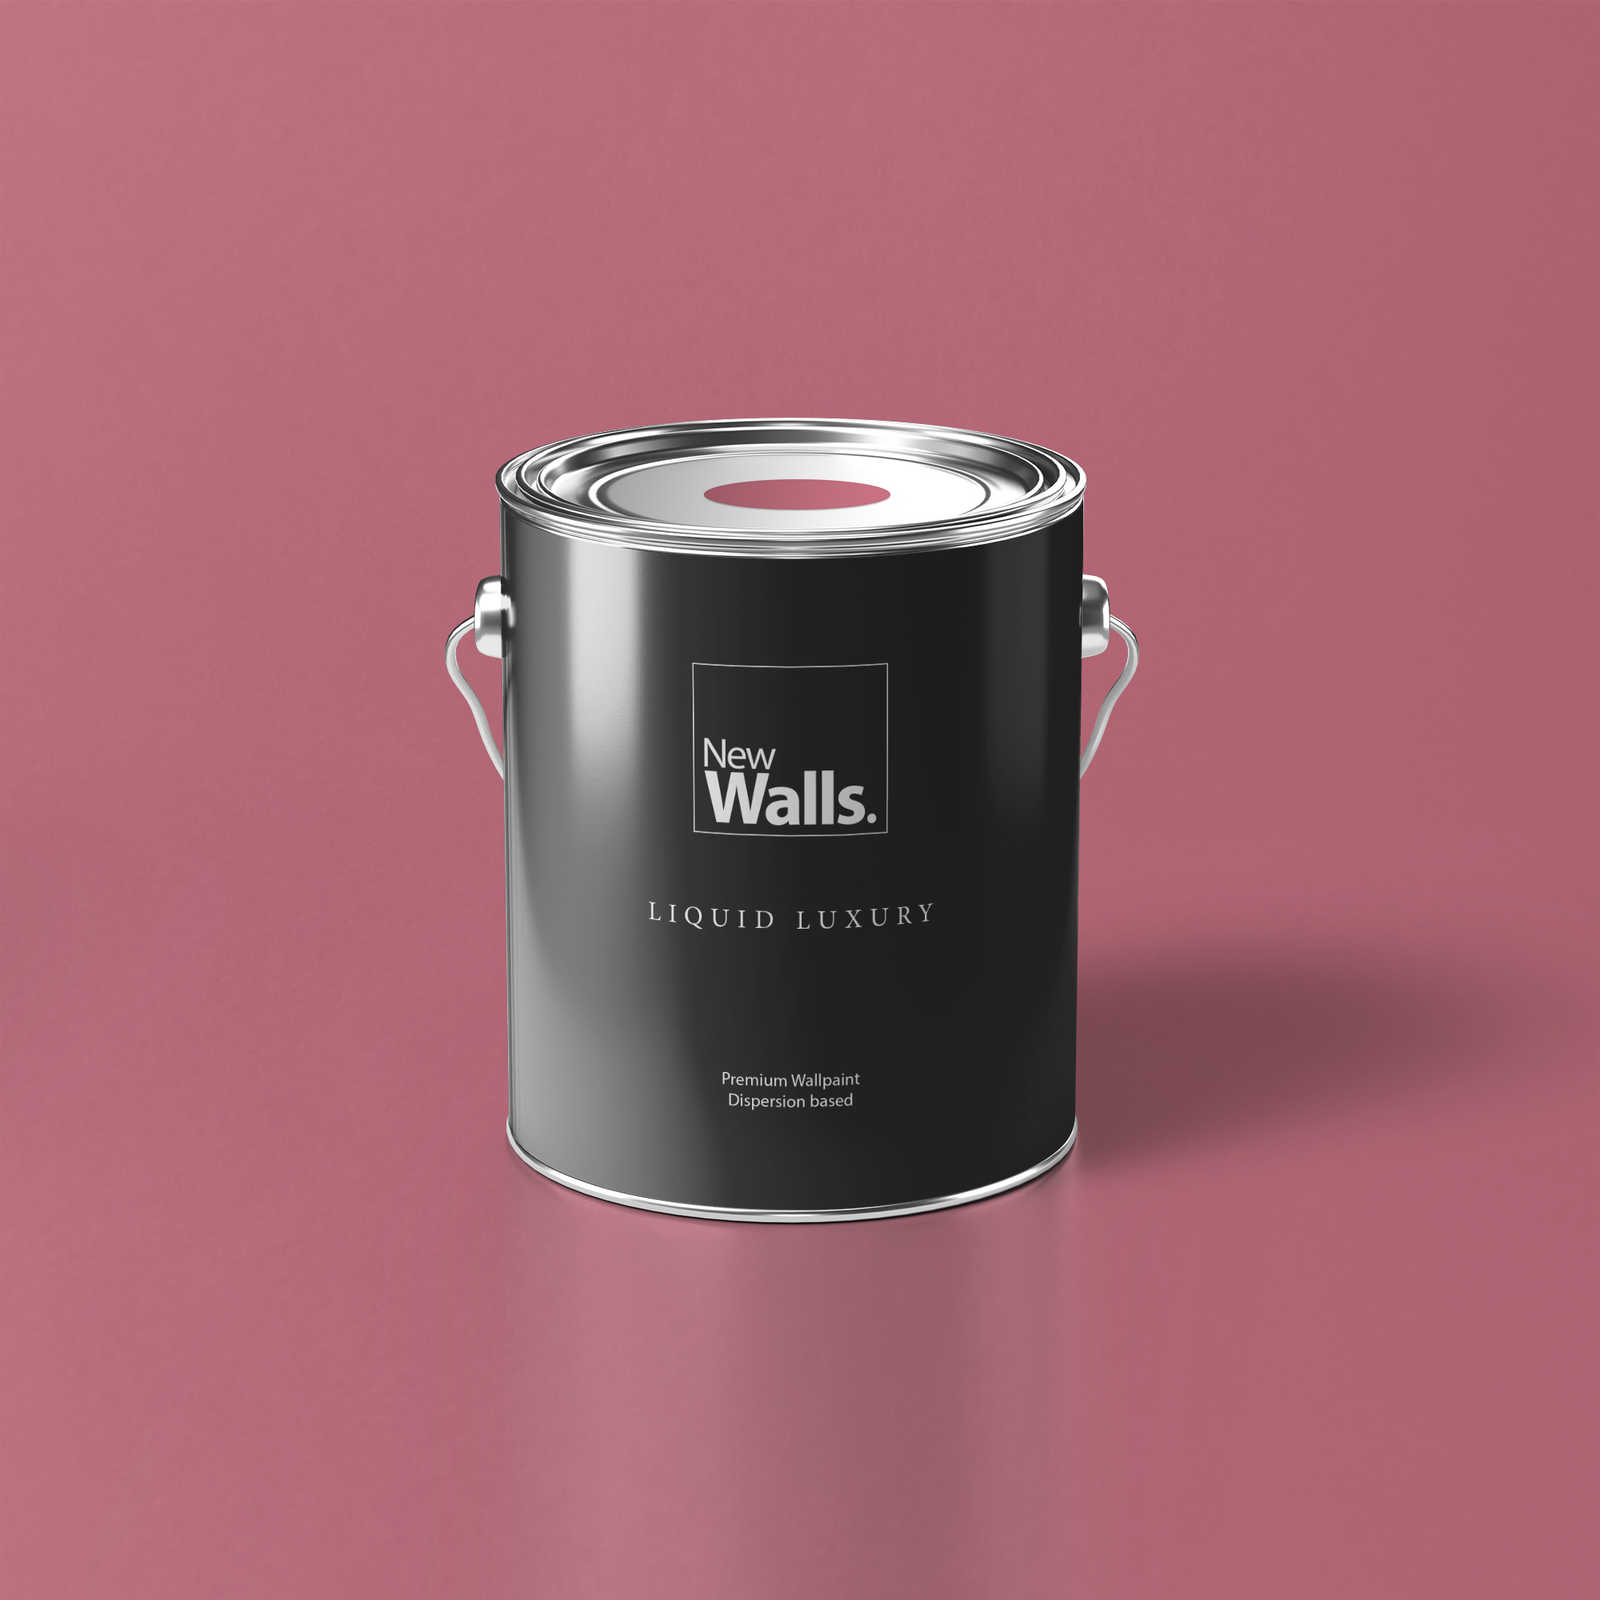 Premium Wall Paint Refreshing Dark Pink »Blooming Blossom« NW1018 – 5 litre
